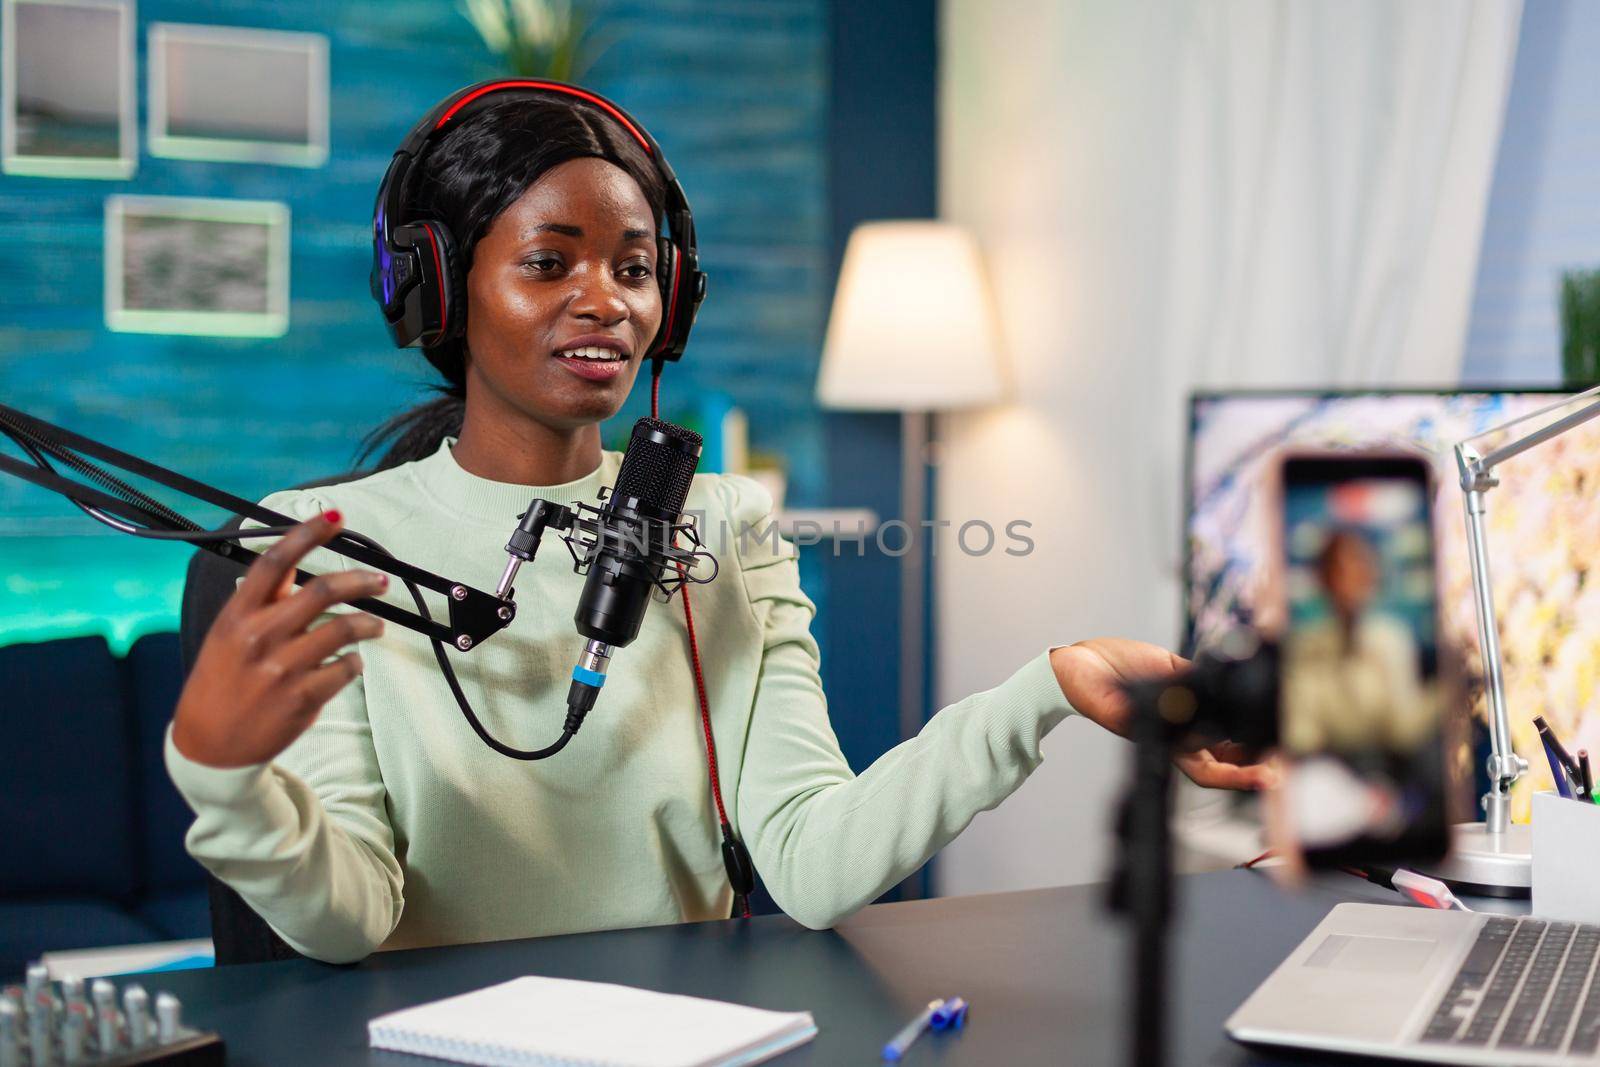 Influencer making online internet content for web subscribers in home podcast studio. Speaking during livestreaming, blogger discussing in podcast wearing headphones.